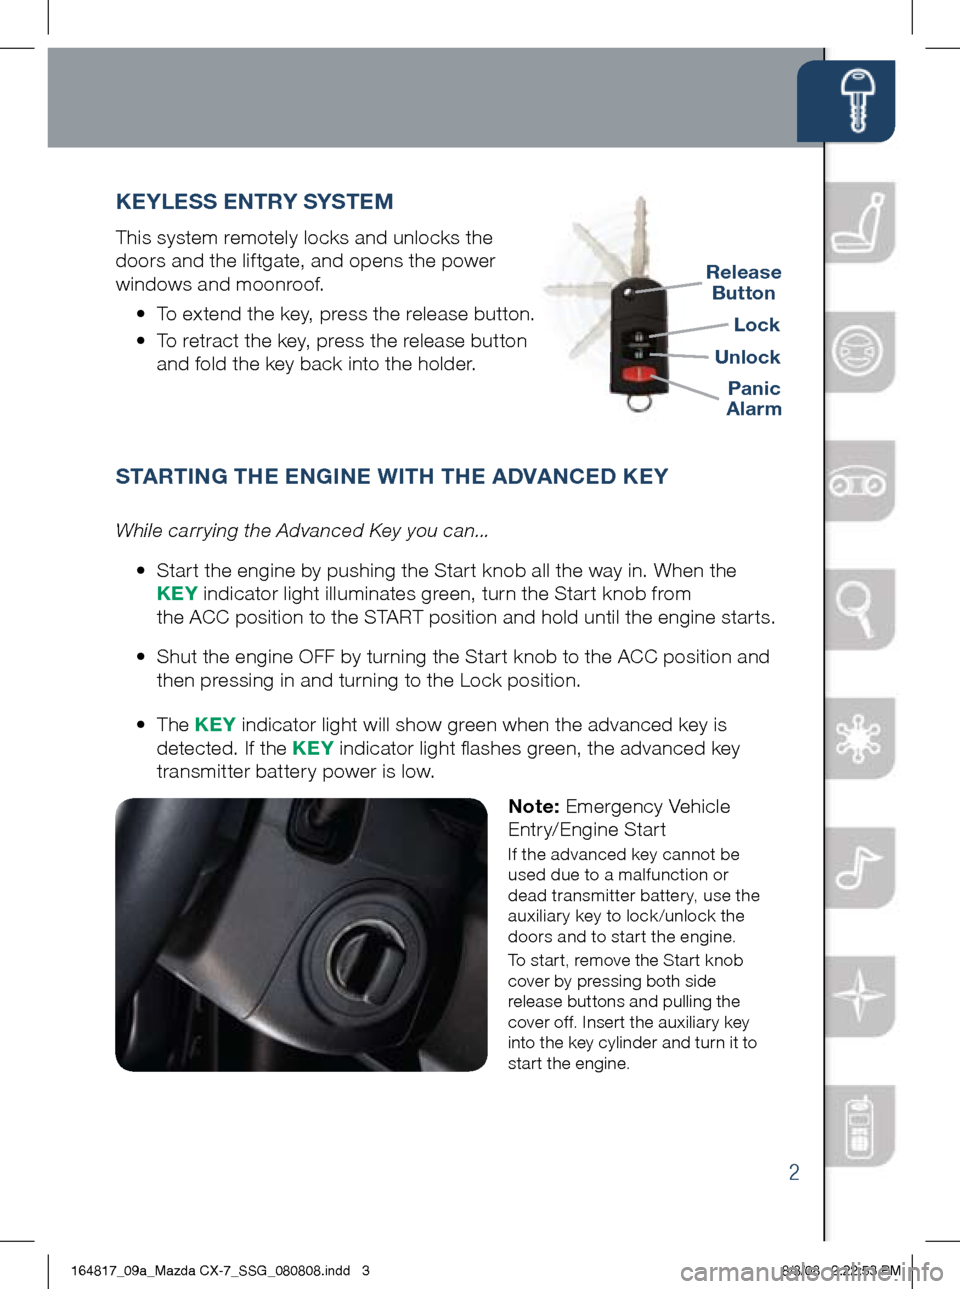 MAZDA MODEL CX-7 2009  Smart Start Guide (in English) 2
START iN g T hE EN giNE wi Th T hE A DVANCED K EY
While carrying the Advanced Key you can...
	 •		 Start	the	engine	by	pushing	the	Start	knob	all	the	way	in.	When	the 	 
KEY 	indicator	light	illum